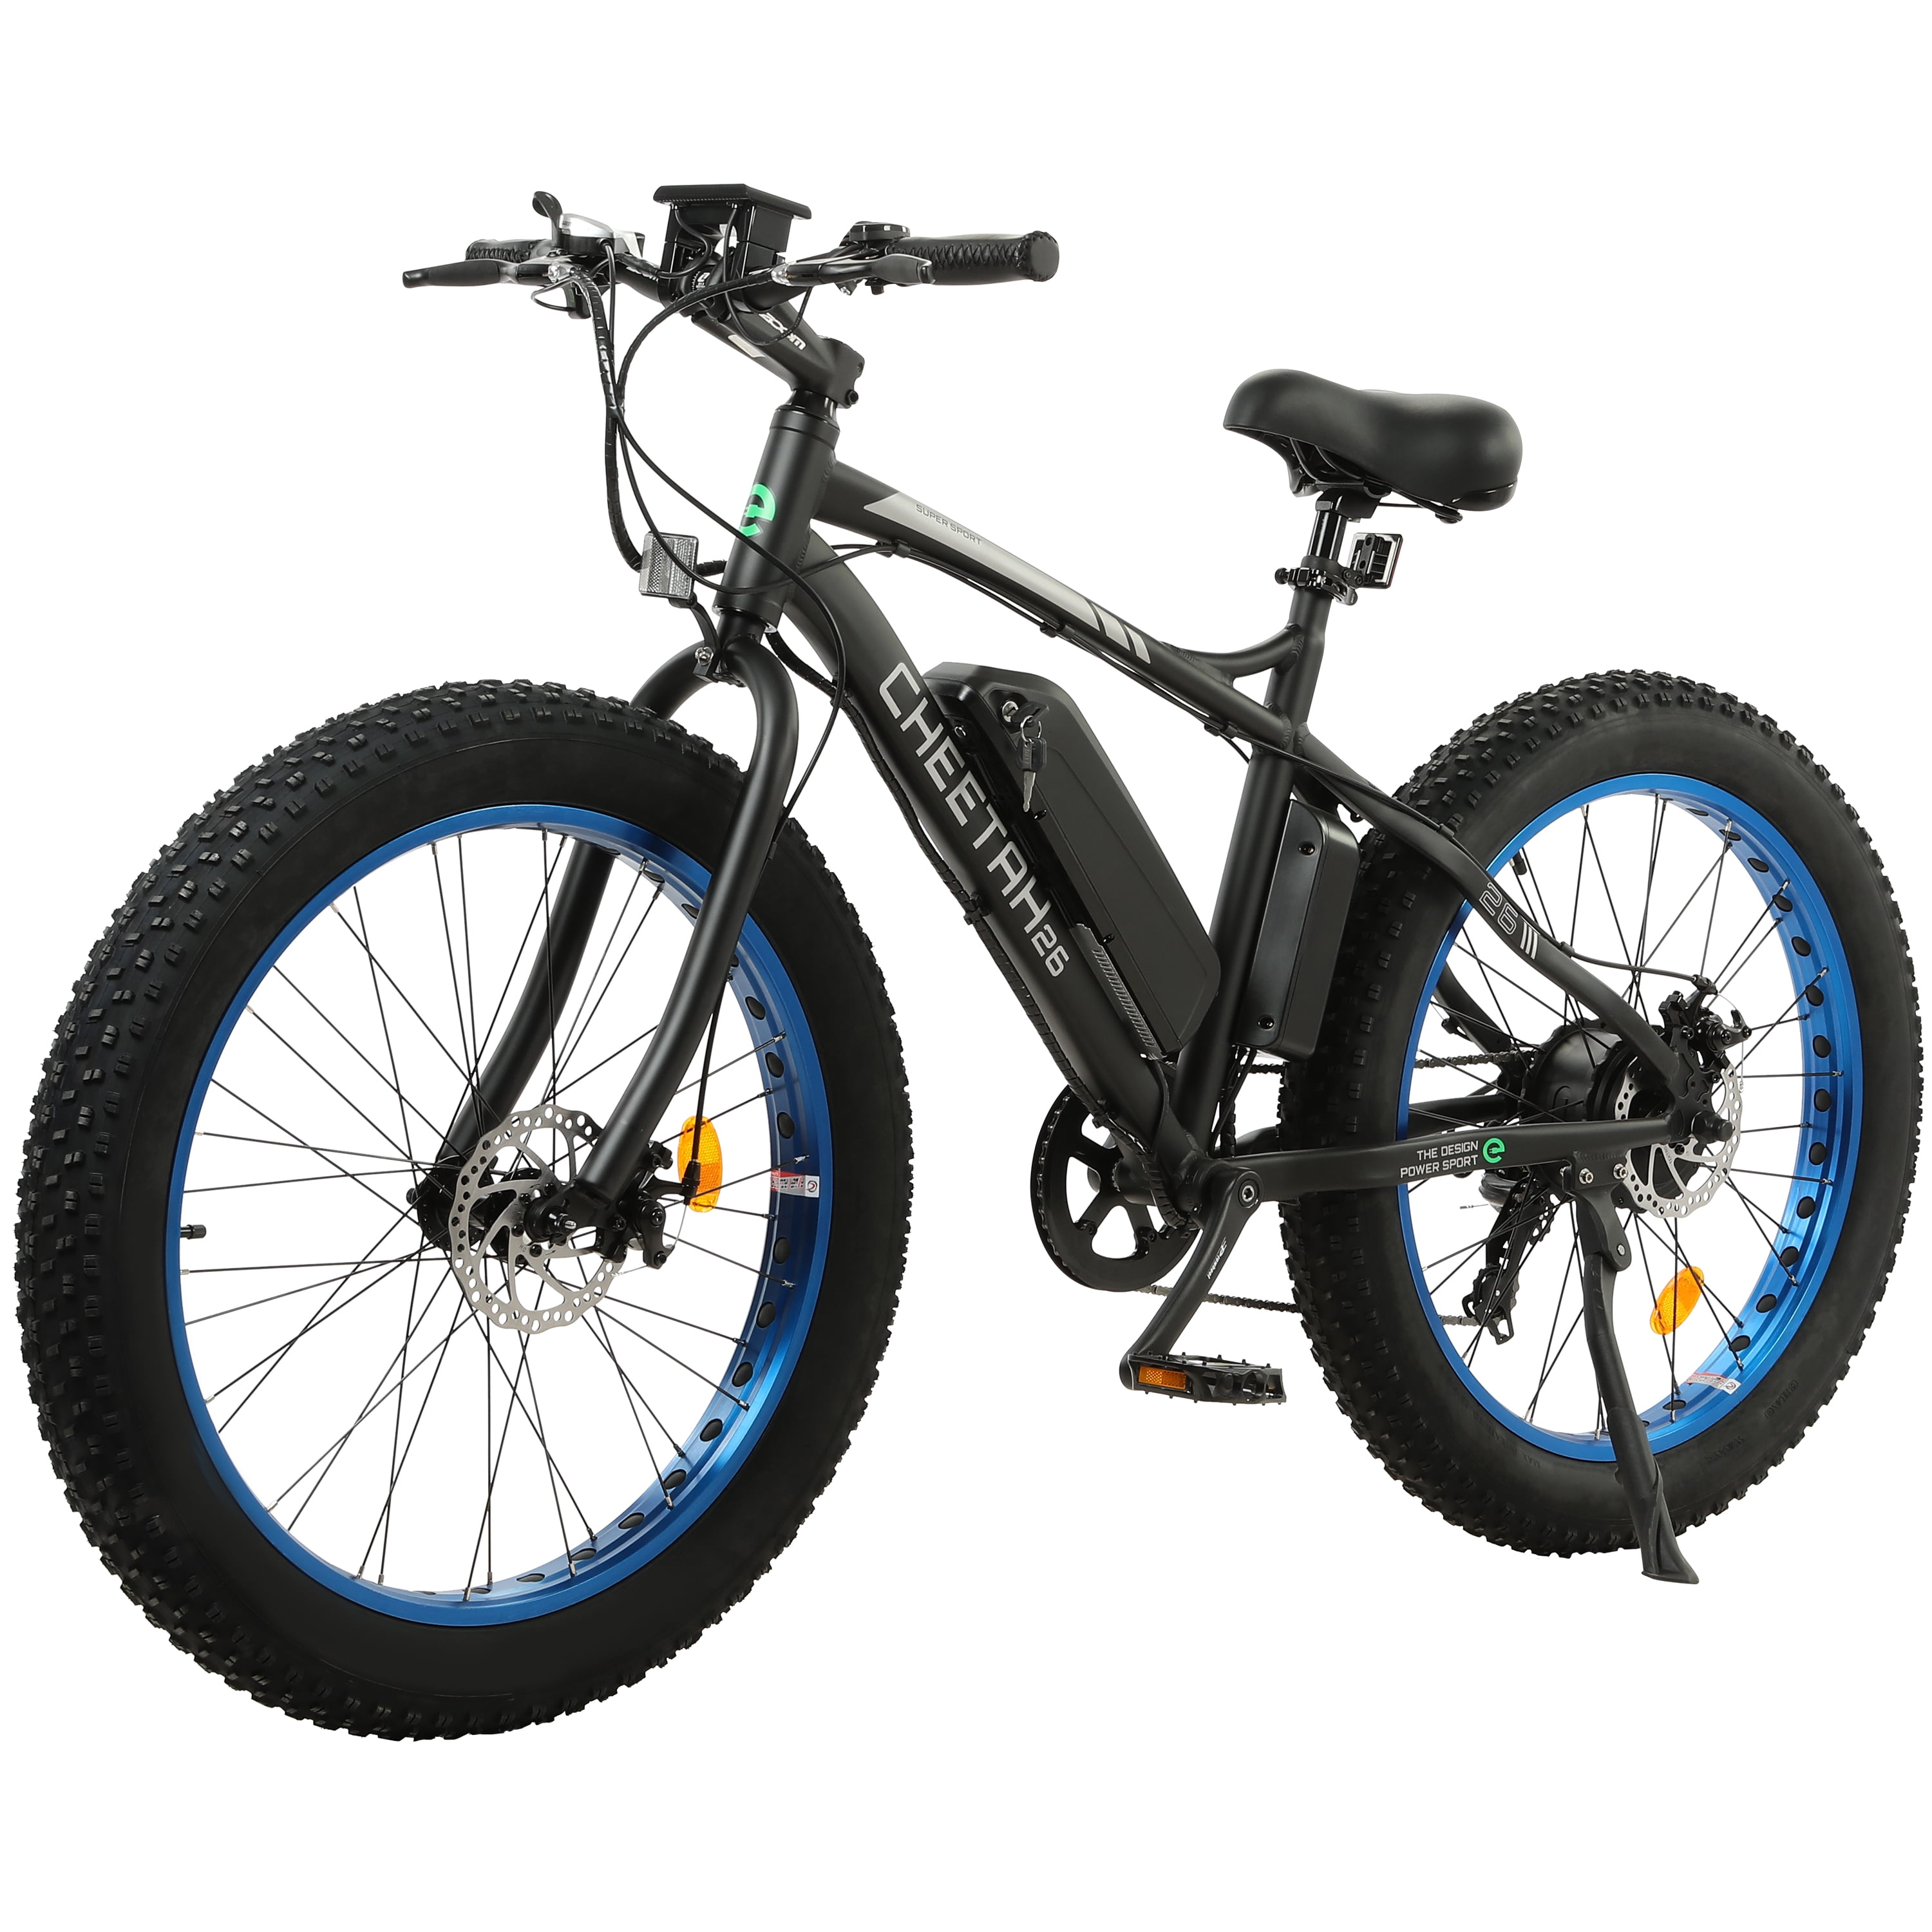 Adviseur musicus Feest Ecotric Powerful Electric Bicycle 26 In. x 4 In. Blue Fat Tire 500 W 36 V  12 AH Battery Moped Beach Mountain Snow Throttle and Pedal Assist - 90%  Pre-Assembled - Walmart.com